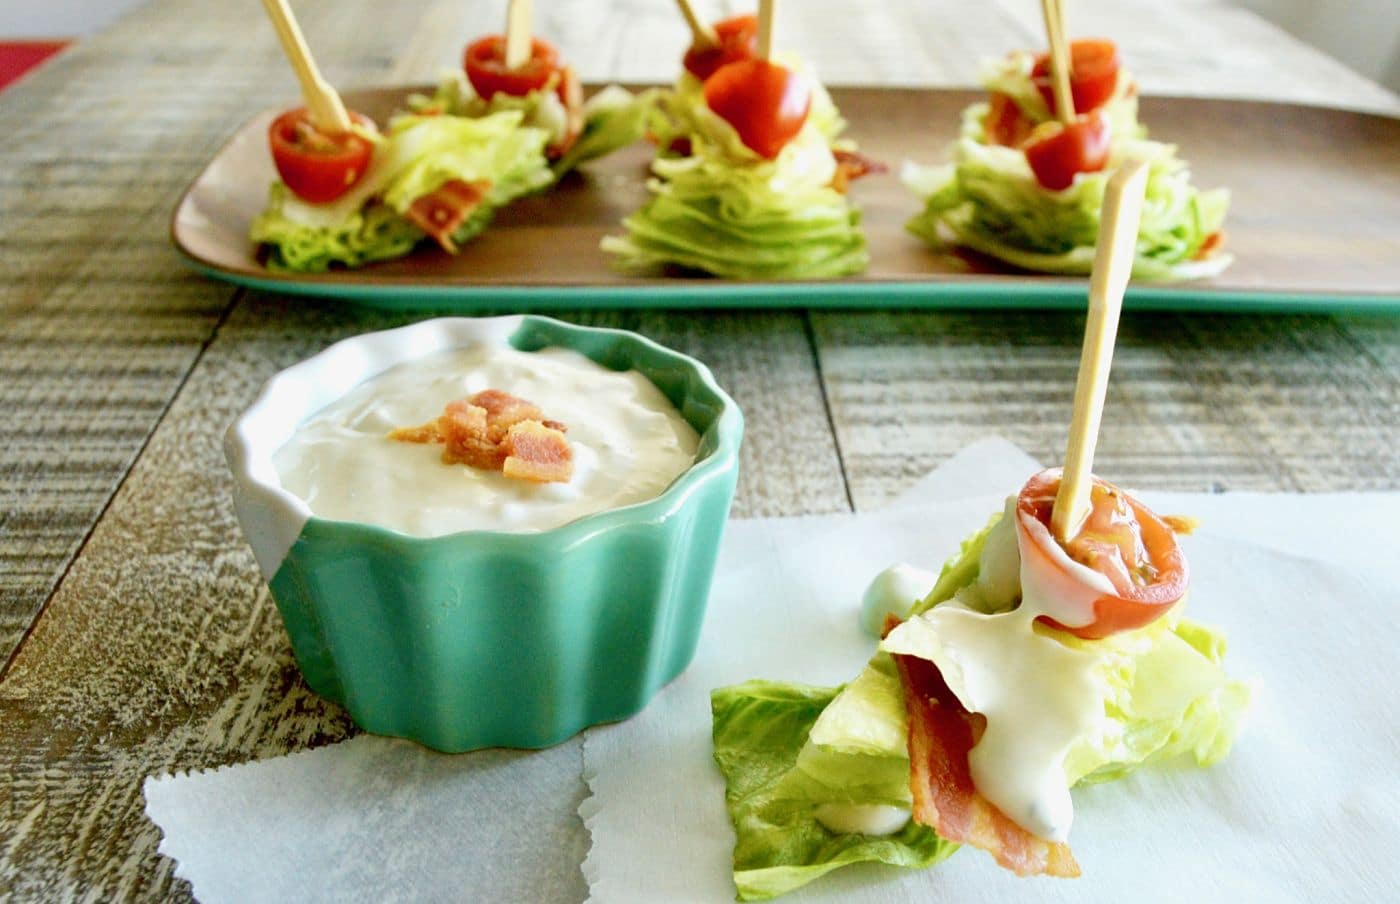 BLT Salad Bites Party appetizer w/ homemade blue cheese dressing!